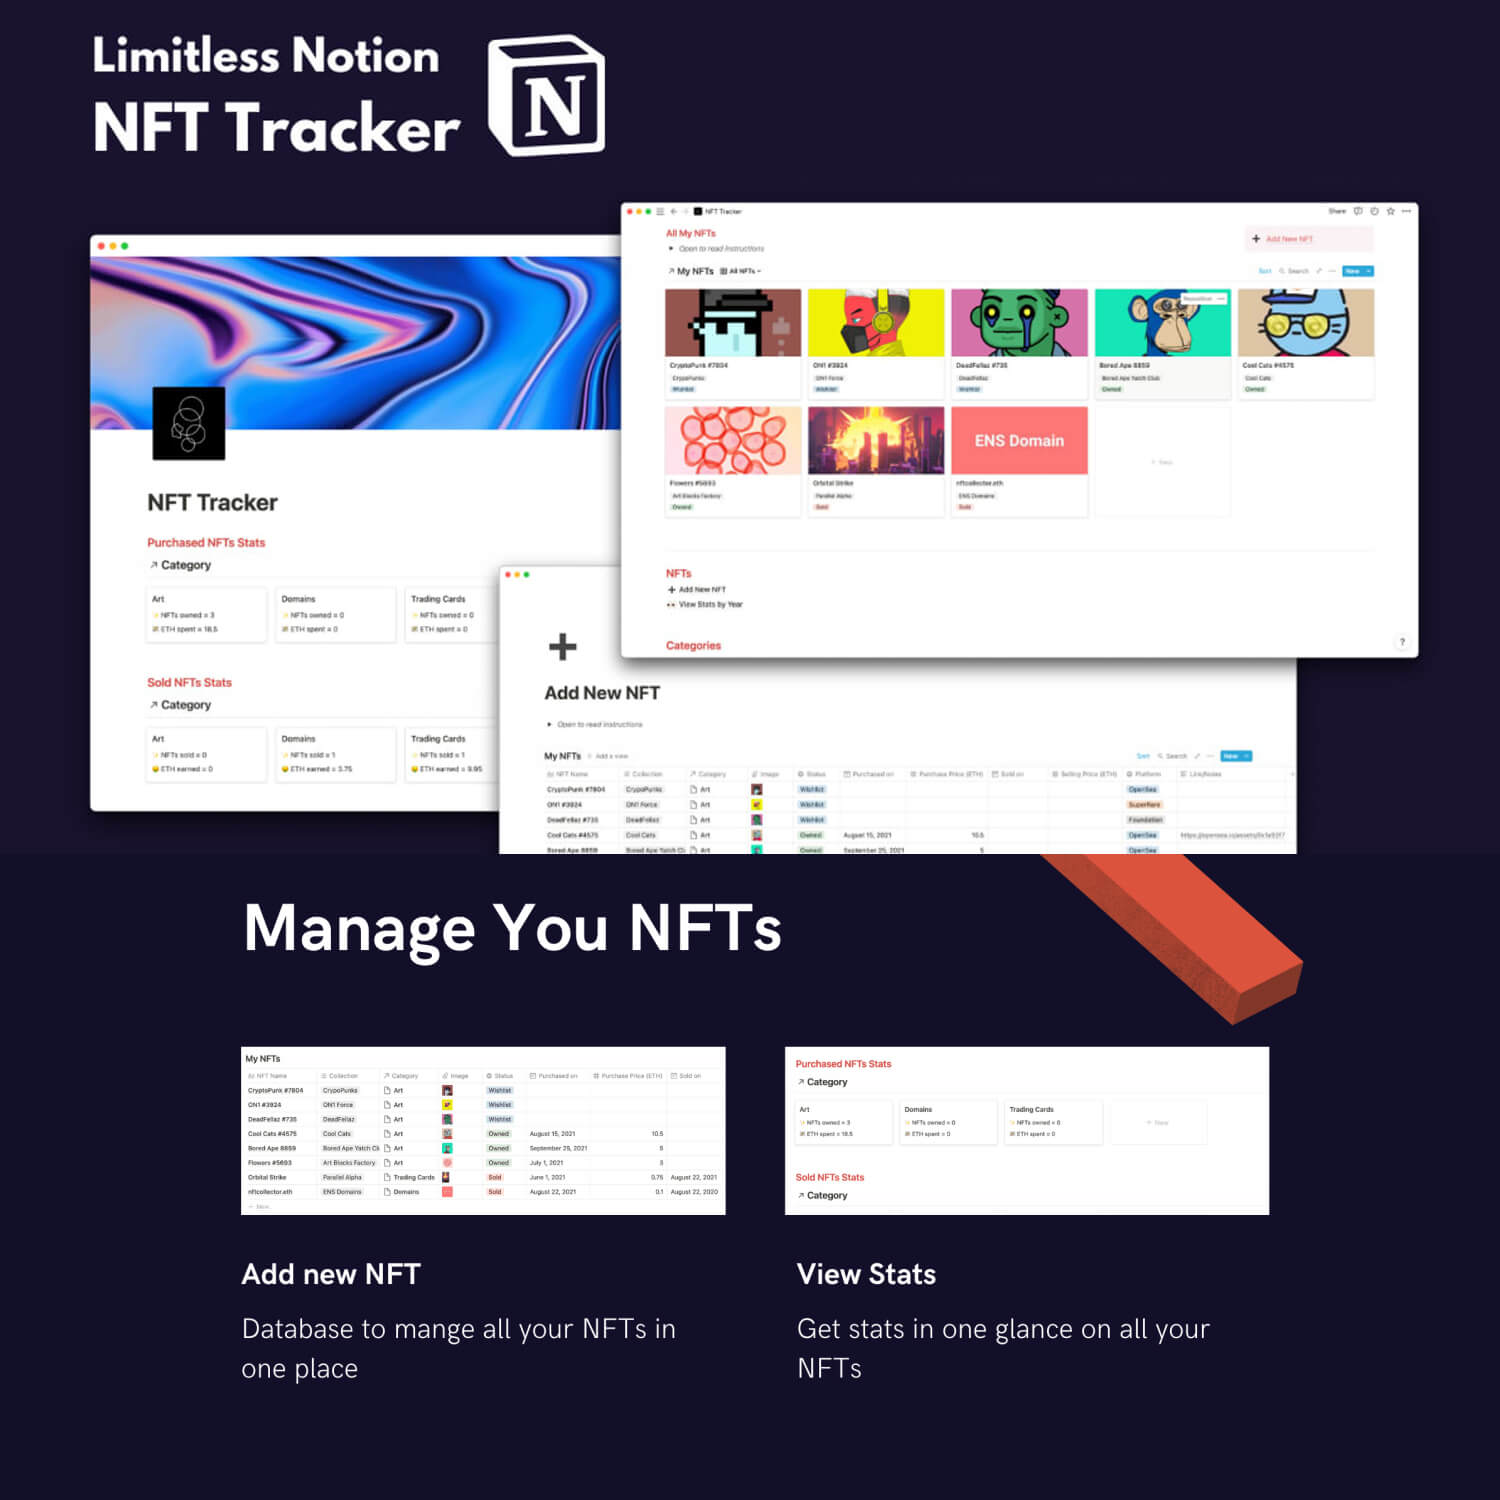 Limitless Notion, NFT Tracker, Manage you NFTs.